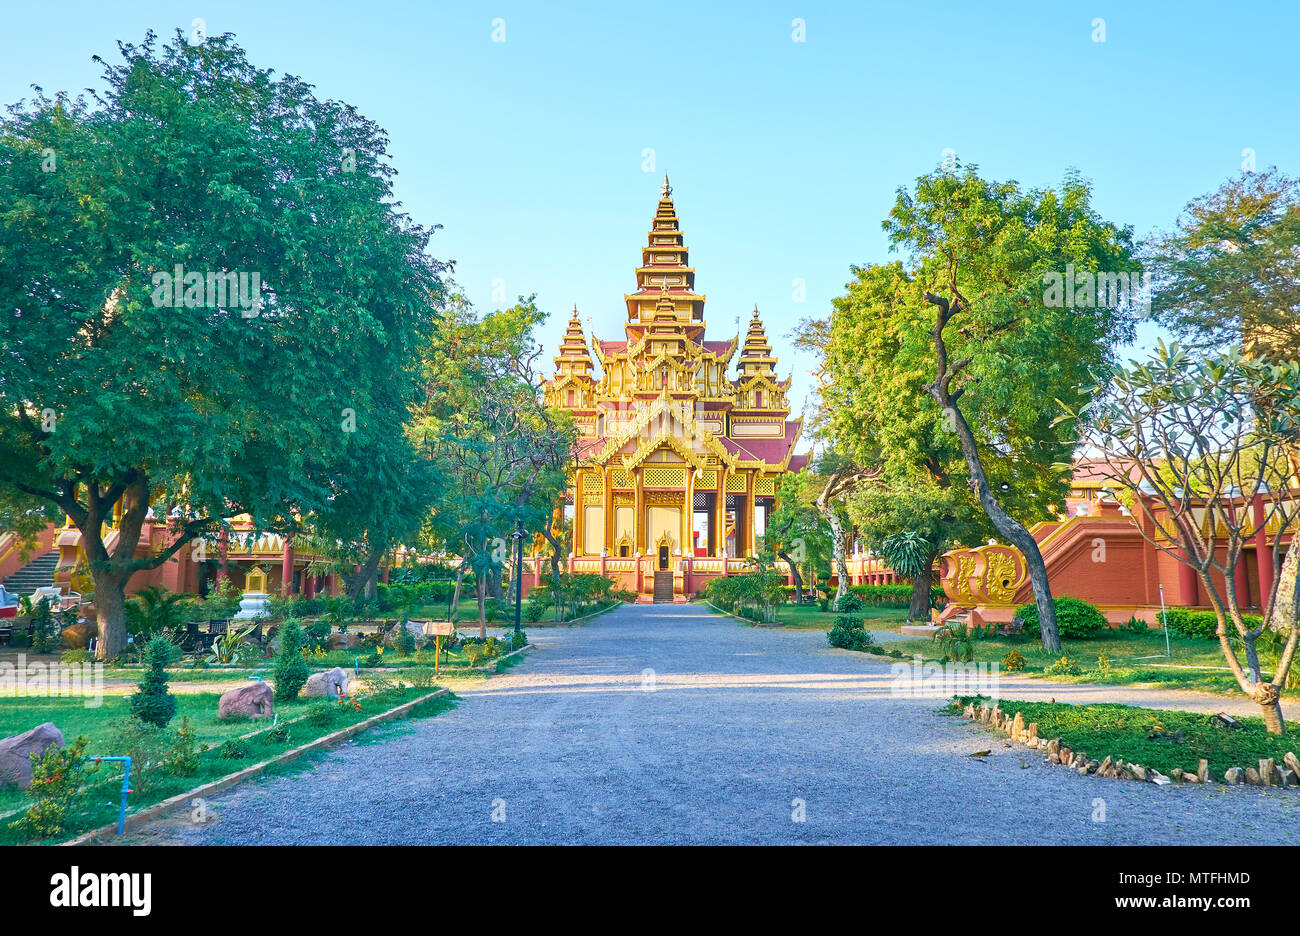 The road to the Great Audience Hall of Golden Palace surrounded with beautiful garden, Bagan, Myanmar Stock Photo